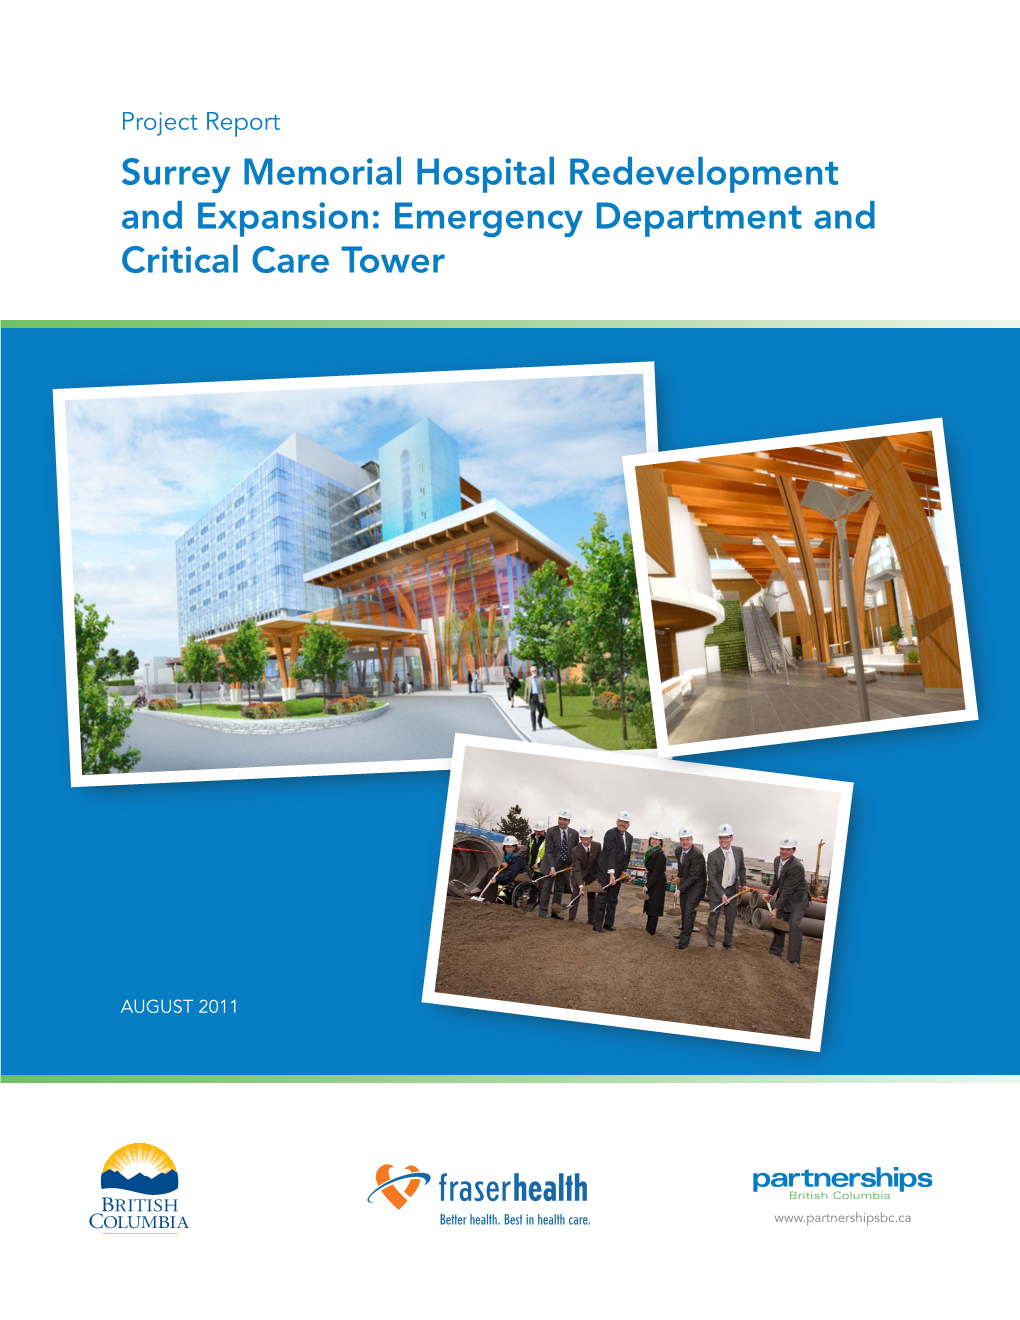 Surrey Memorial Hospital Redevelopment and Expansion: Emergency Department and Critical Care Tower